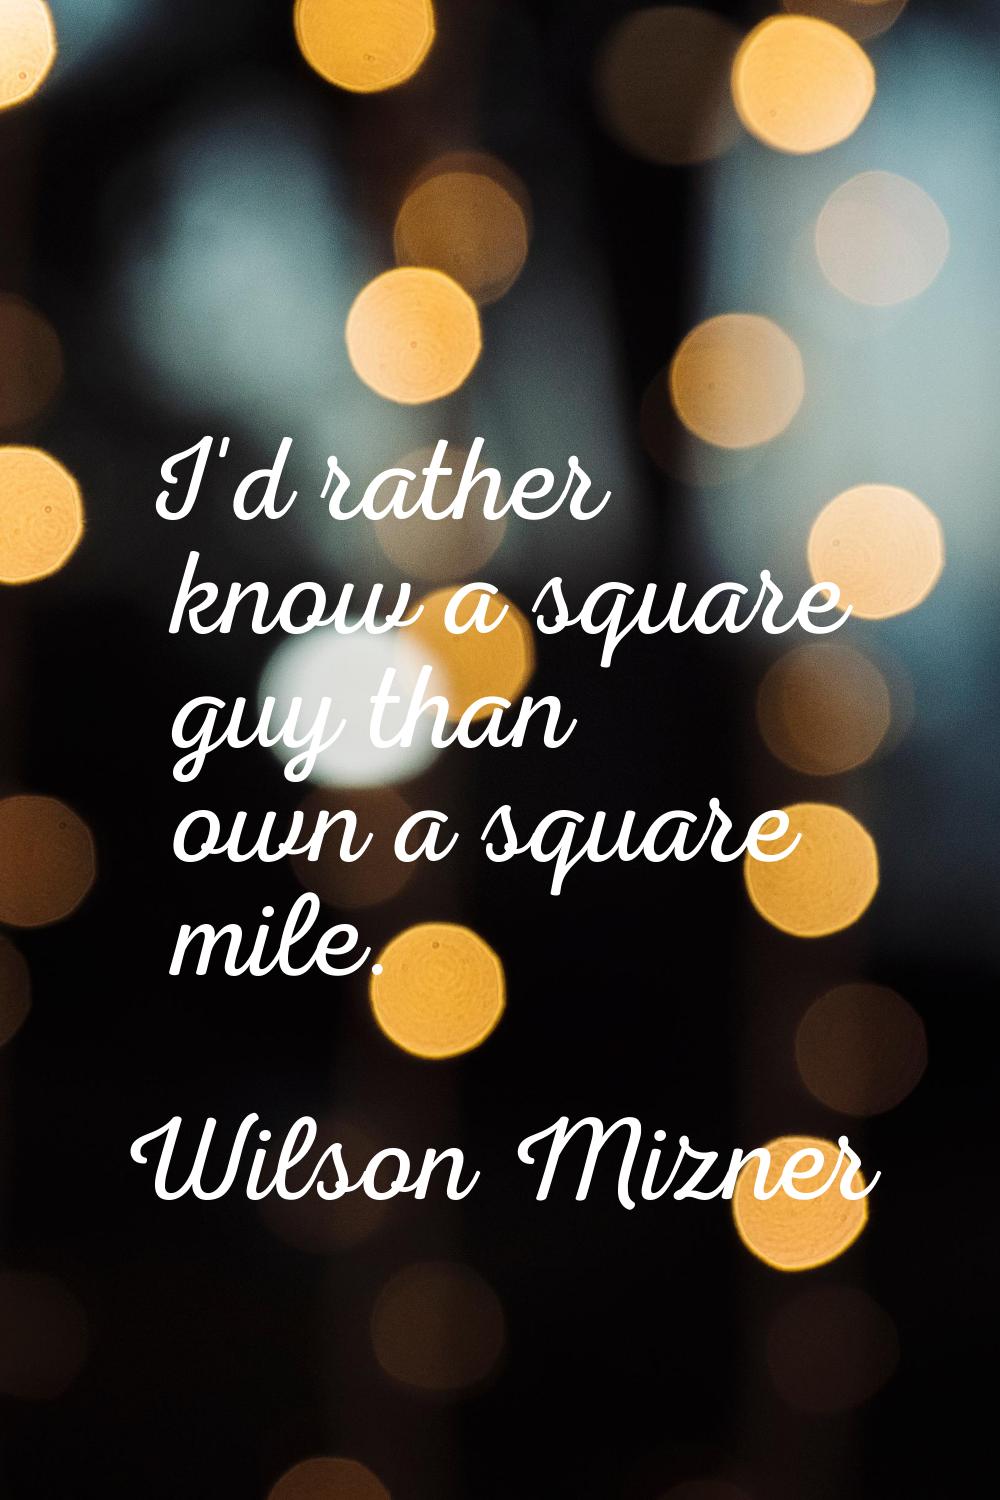 I'd rather know a square guy than own a square mile.